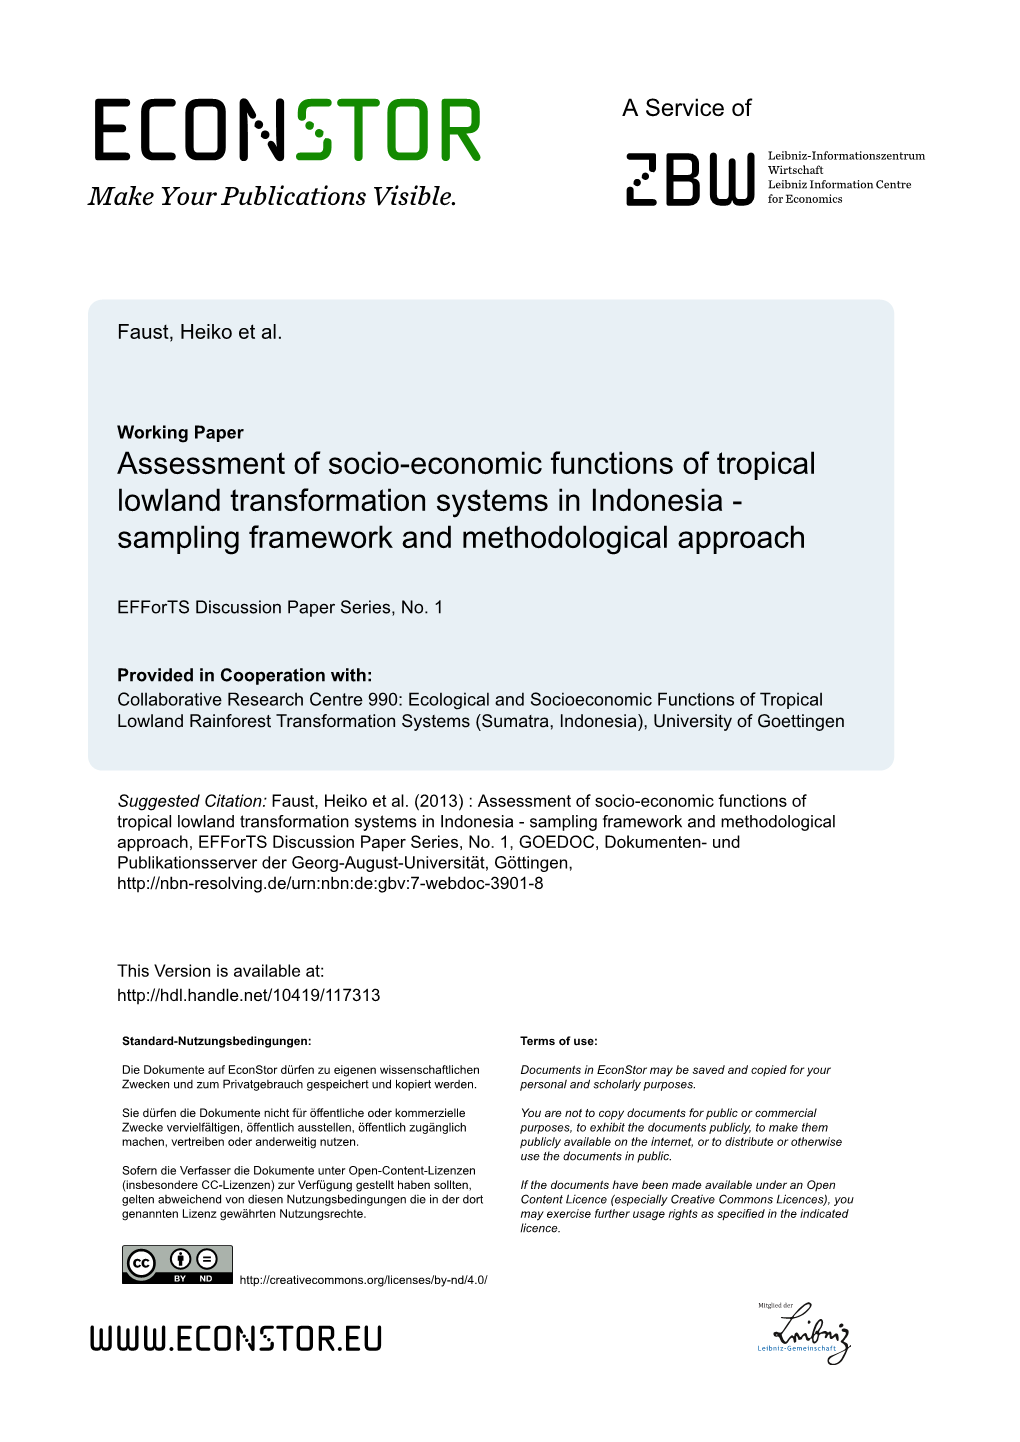 Assessment of Socio-Economic Functions of Tropical Lowland Transformation Systems in Indonesia - Sampling Framework and Methodological Approach